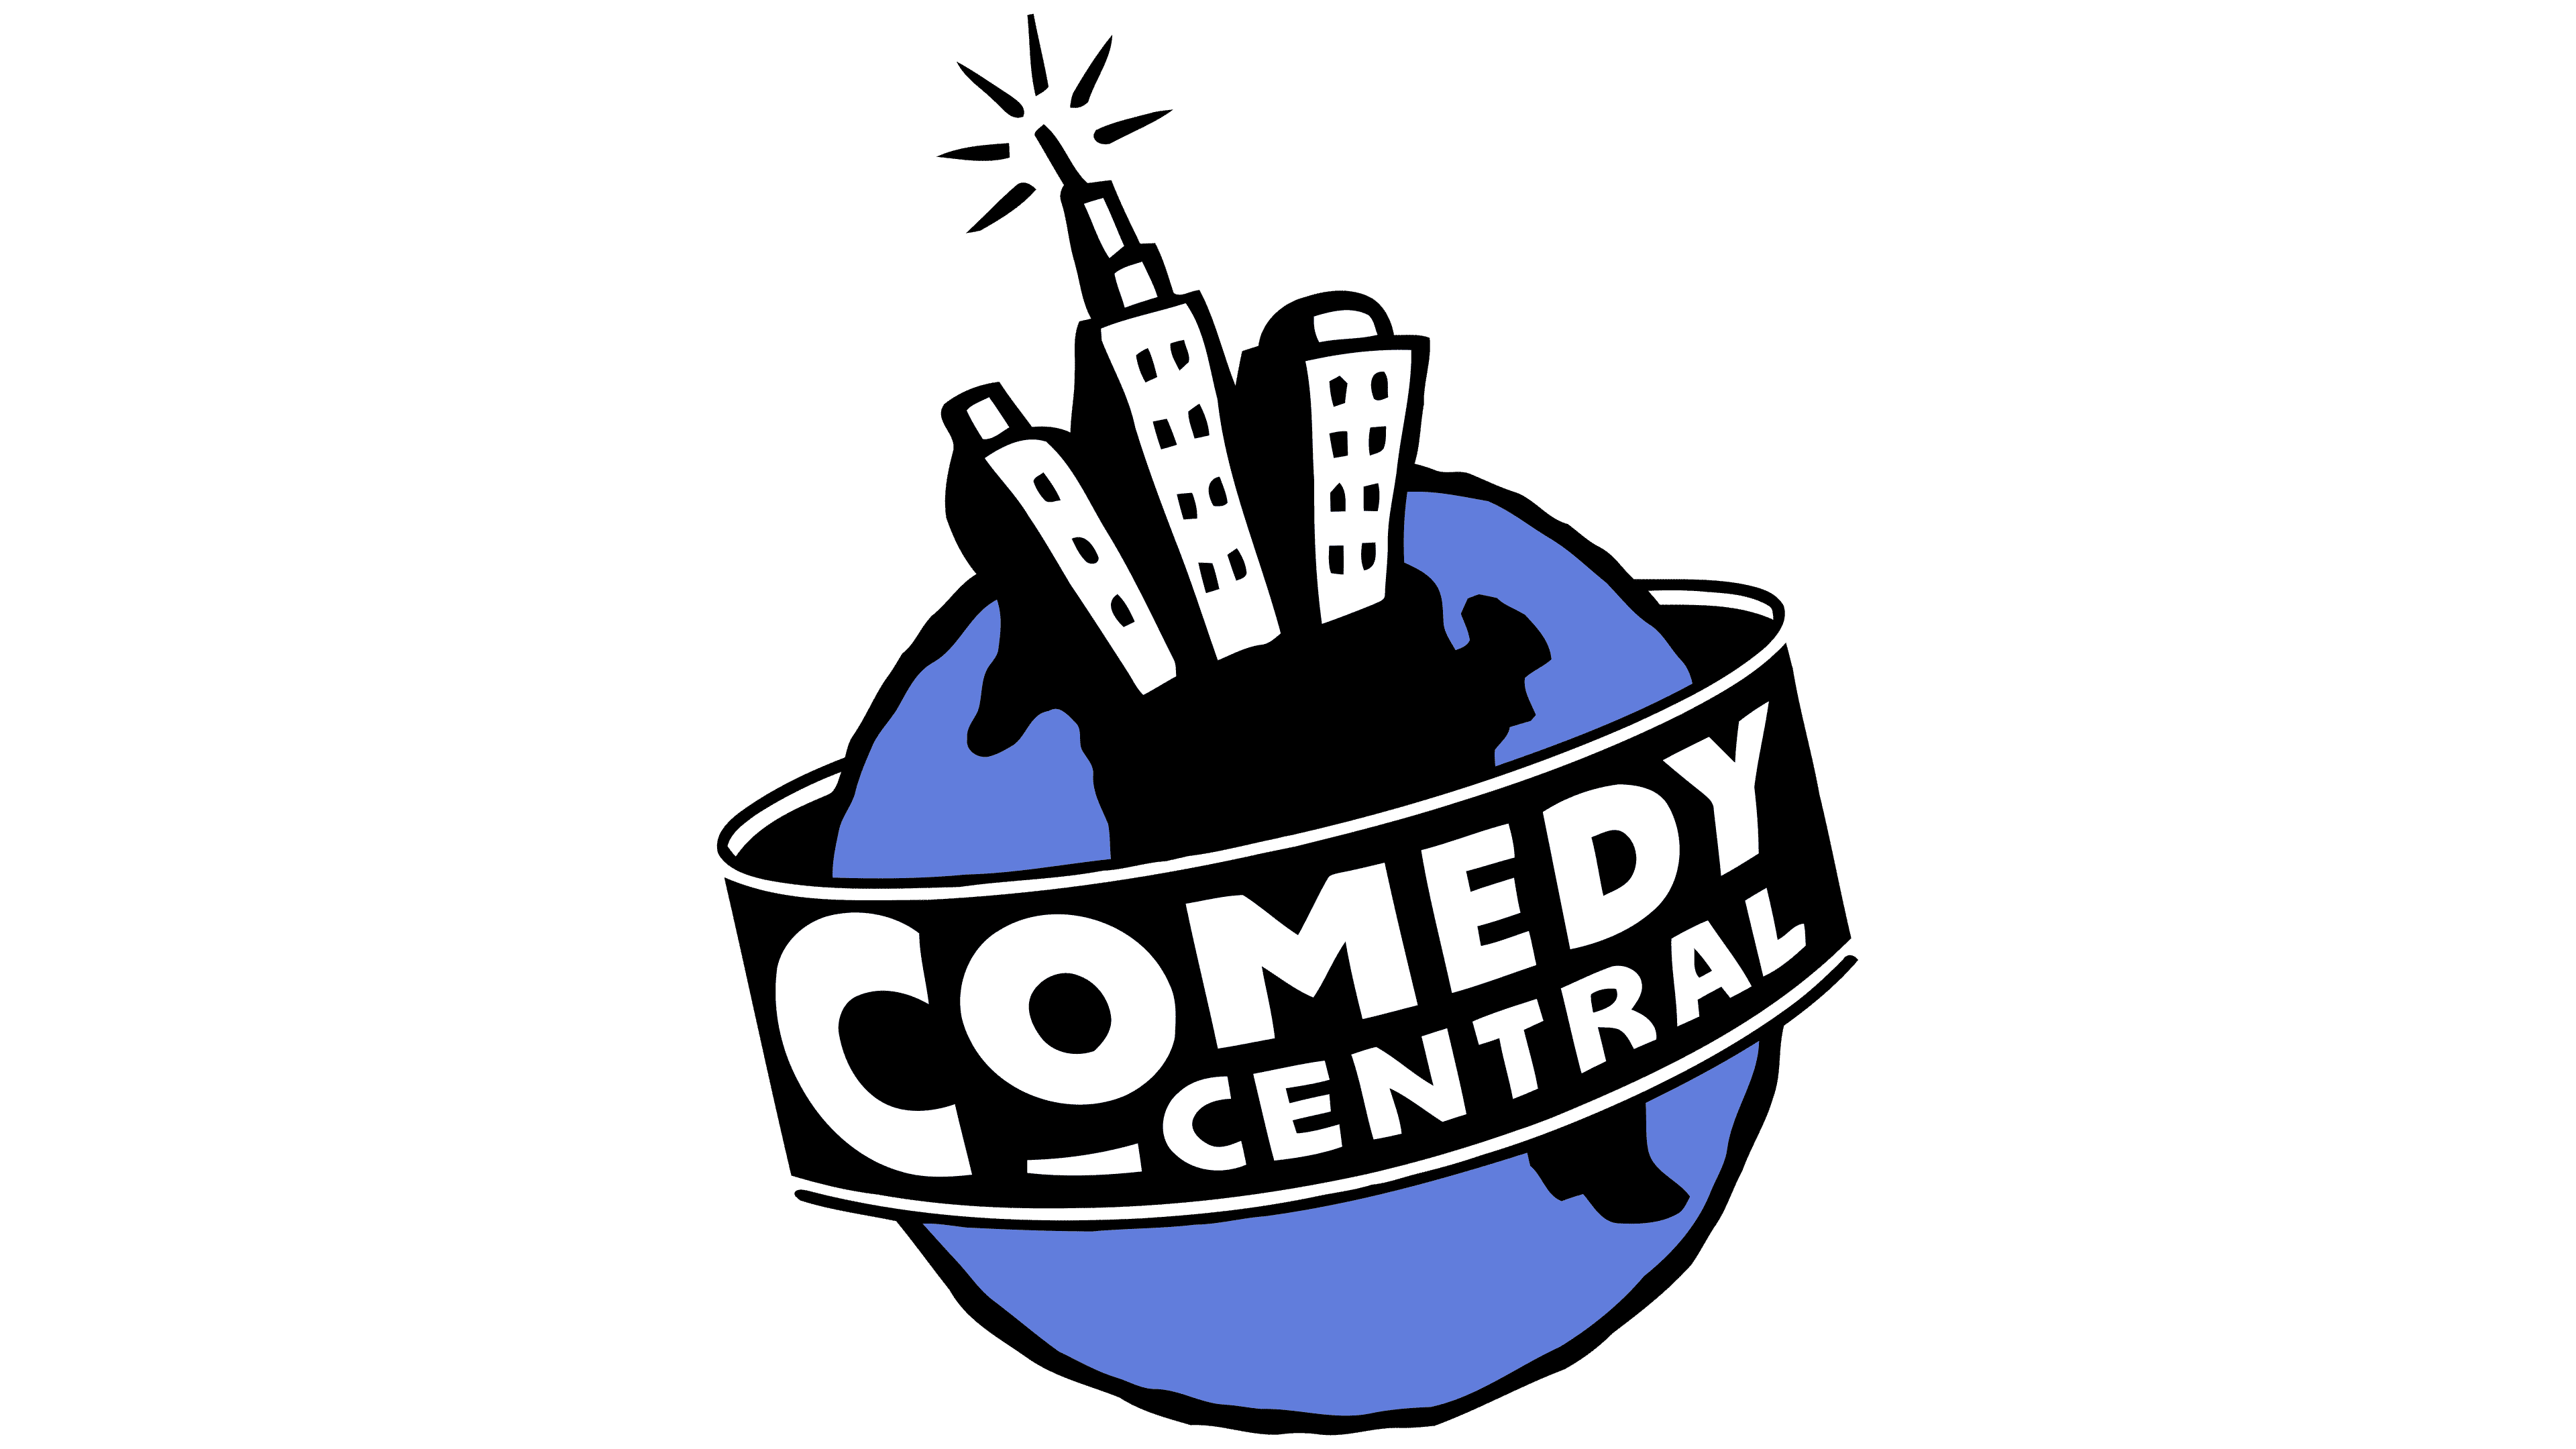 Comedy-Central-Logo-1992-1997.png